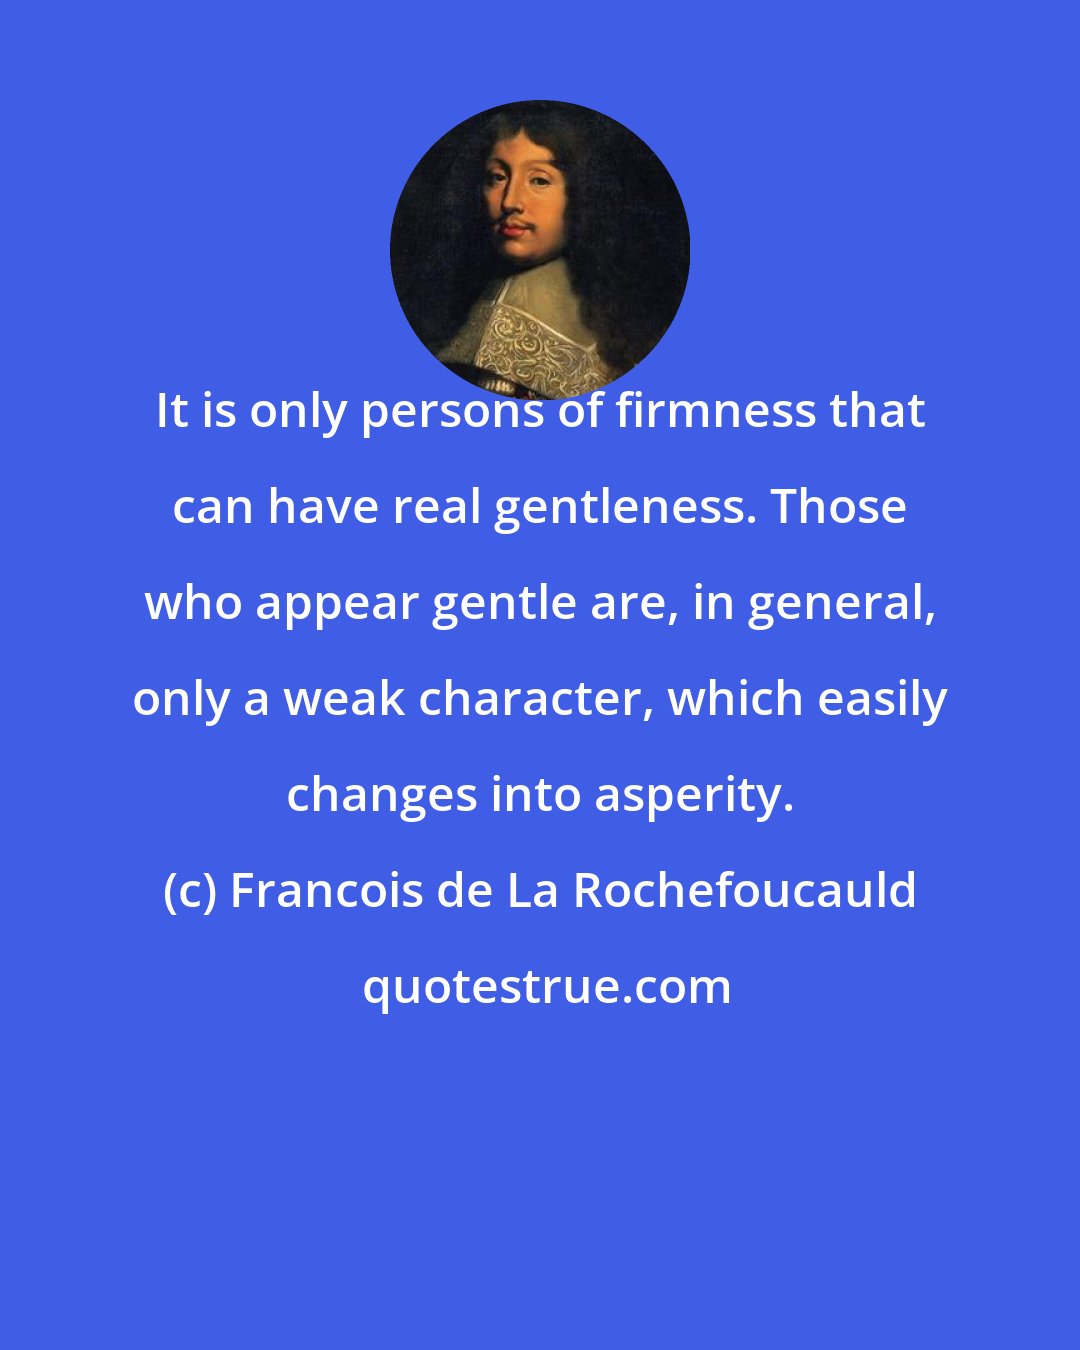 Francois de La Rochefoucauld: It is only persons of firmness that can have real gentleness. Those who appear gentle are, in general, only a weak character, which easily changes into asperity.